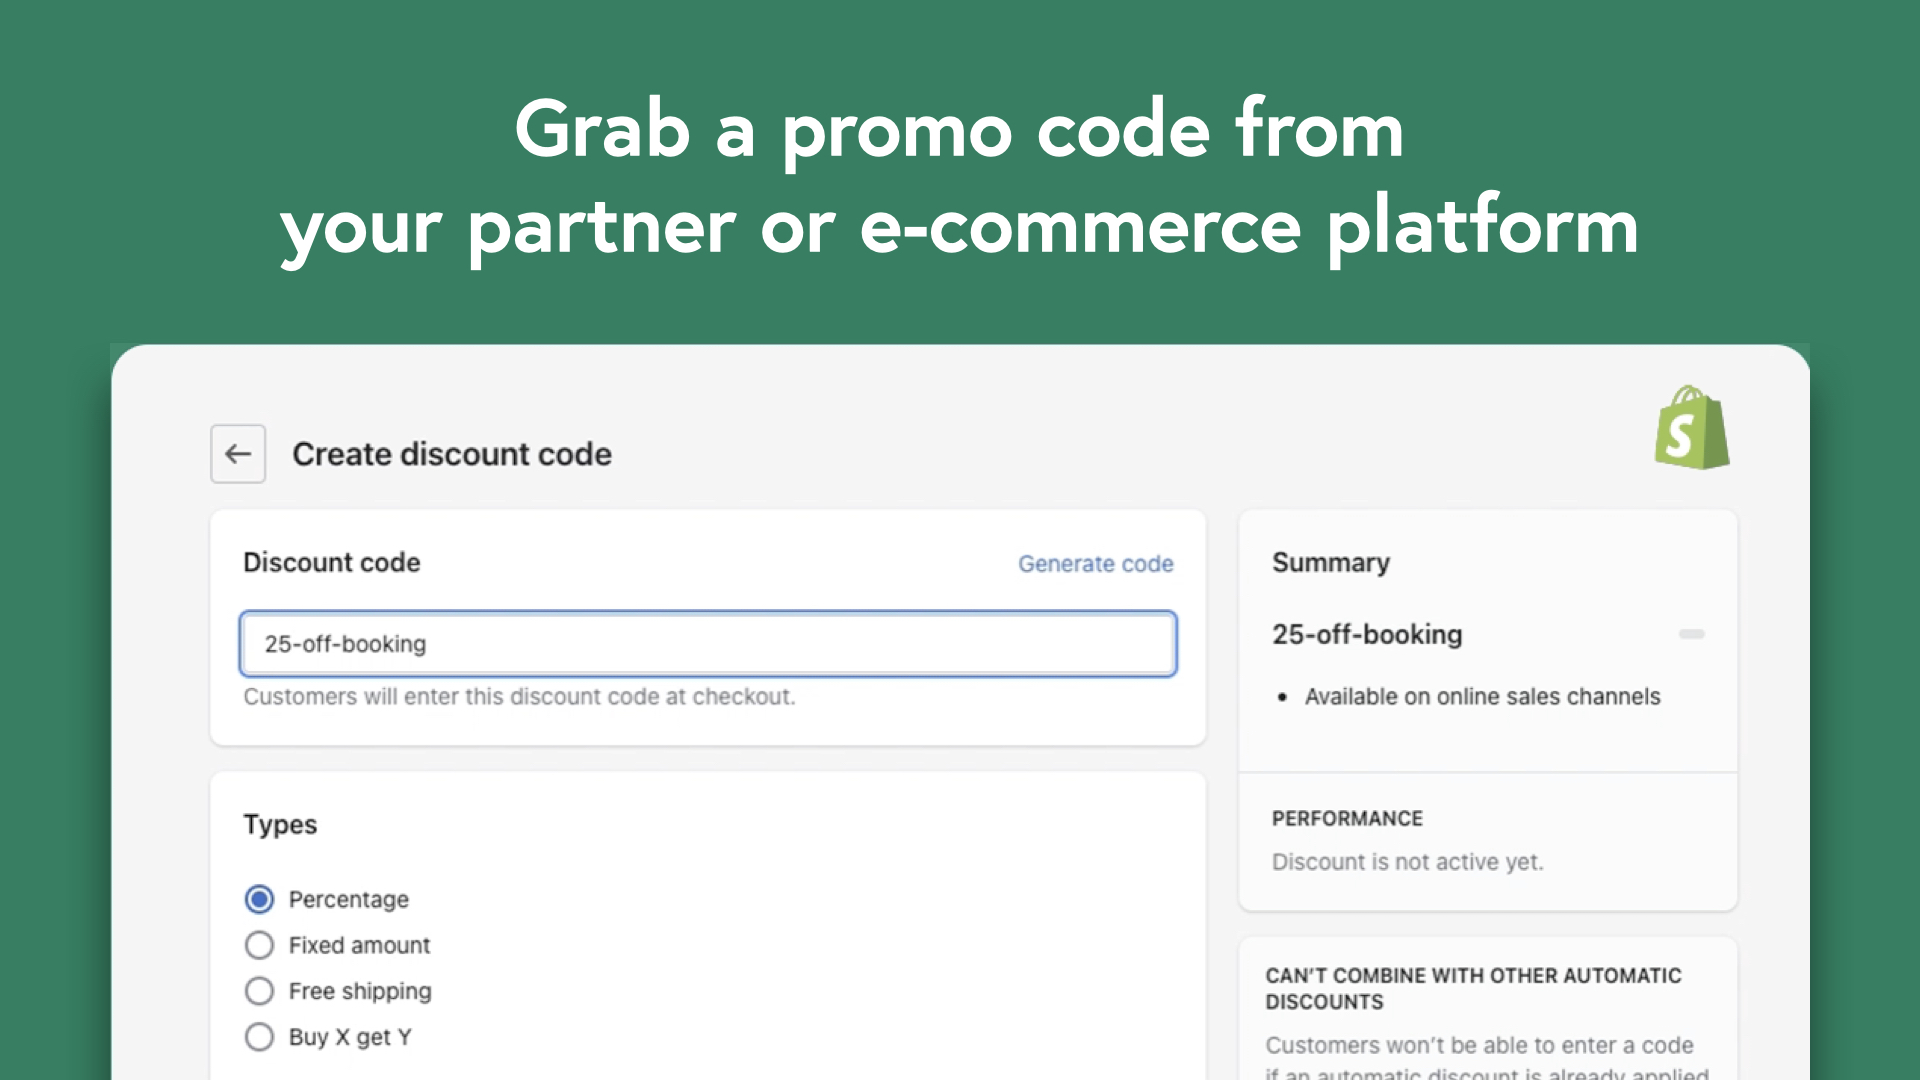 Grab a promo code from your partner or e-commerce platform